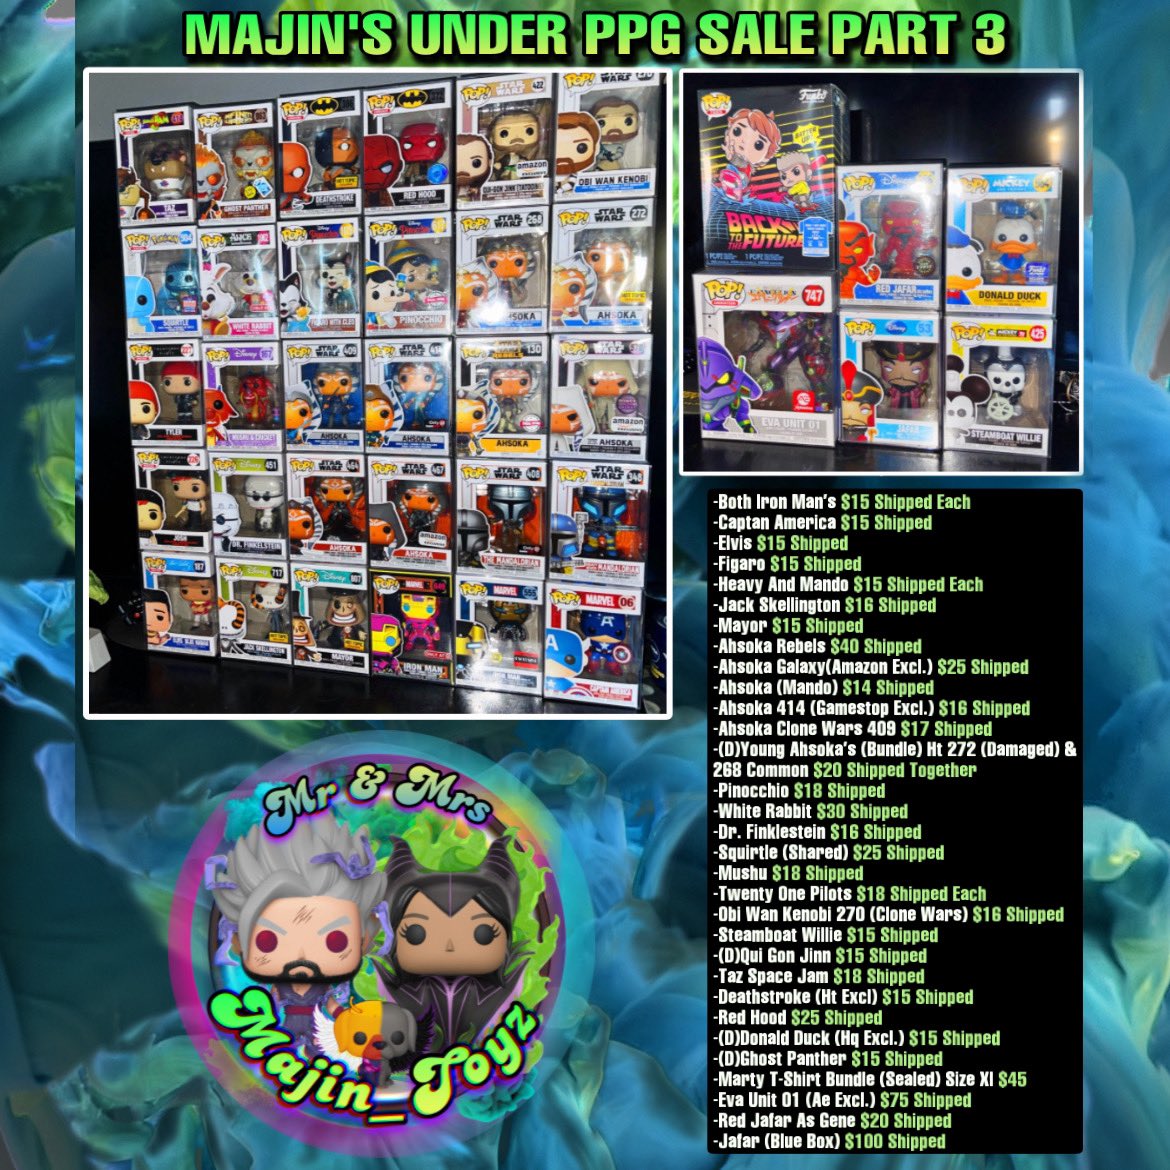 Majin’s Under PPG Sale! PT. 3 #funkofamily #funkosale Please be sure to check out the personal’s we are separating with! Be sure to RT with the Funko Fam All come in soft protectors! Shipping USA Only (sorry folks) Packaged with bubble wrap and care! Blue Box Jafar comes with a